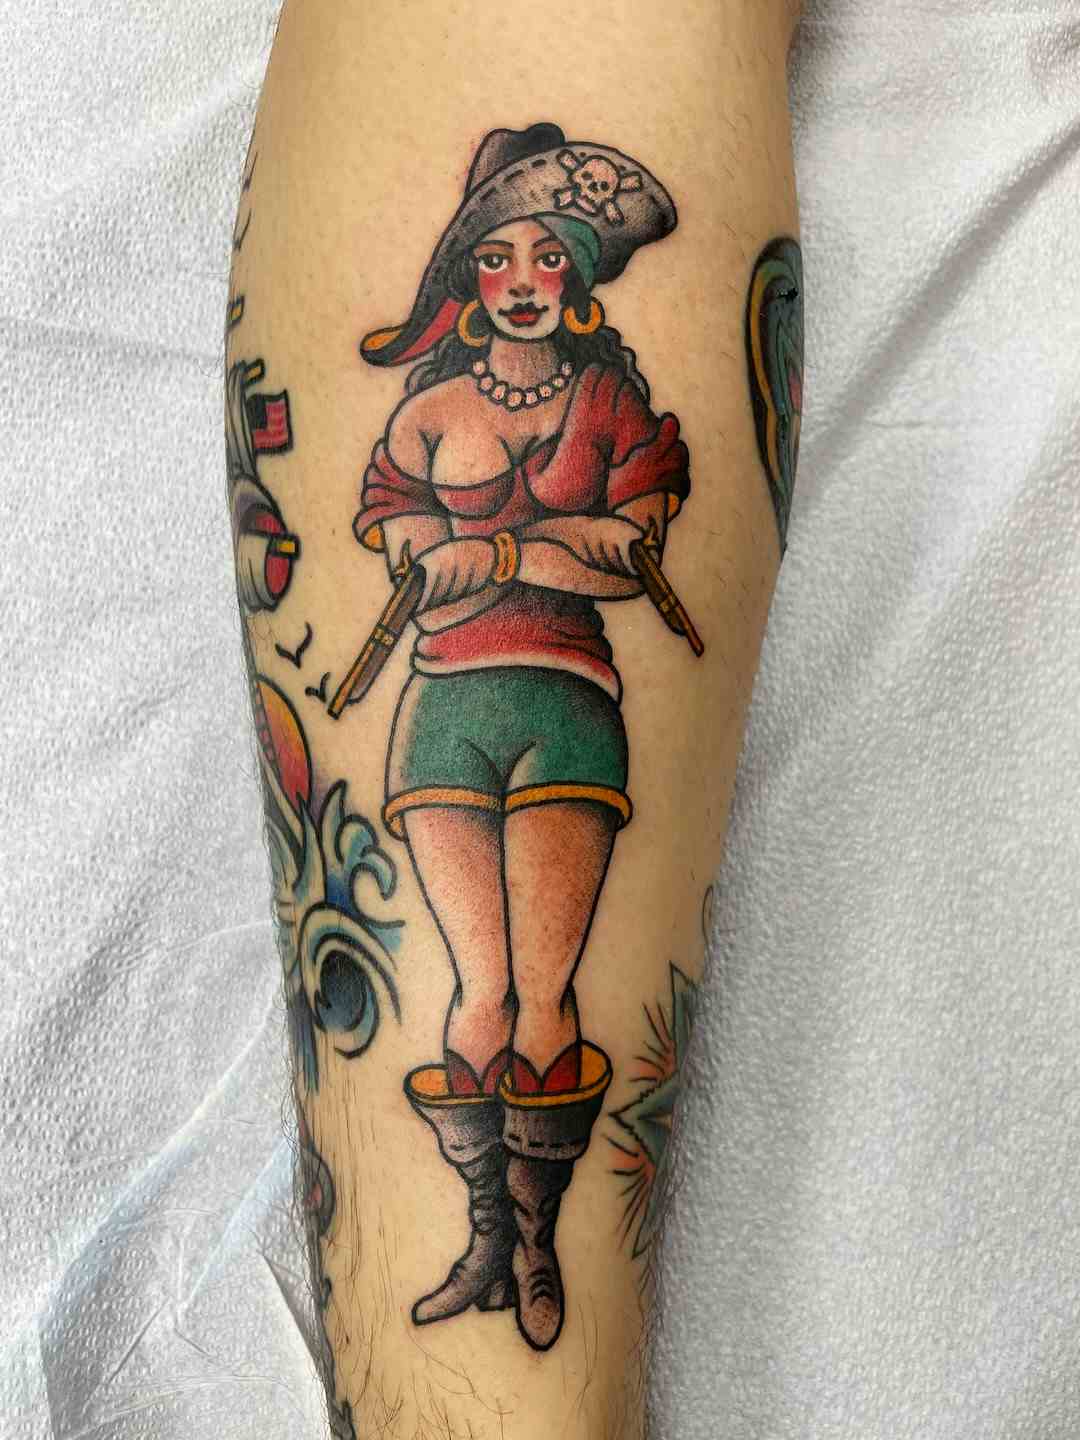 American traditional pirate pinup tattoo